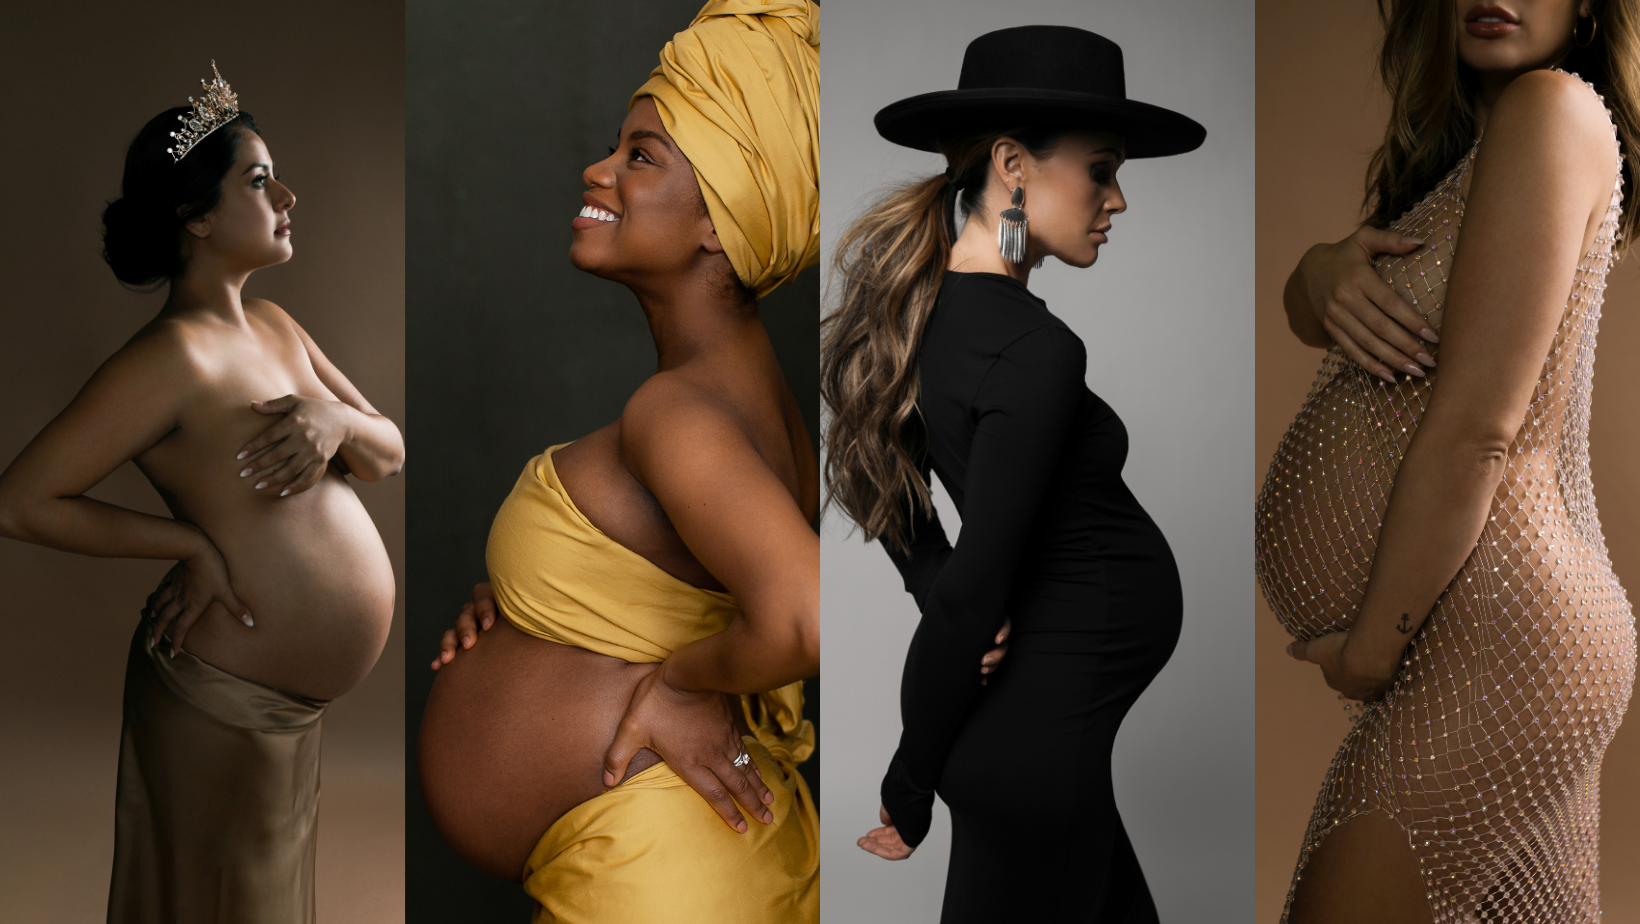 How to Feel Your Best During a Maternity Photoshoot